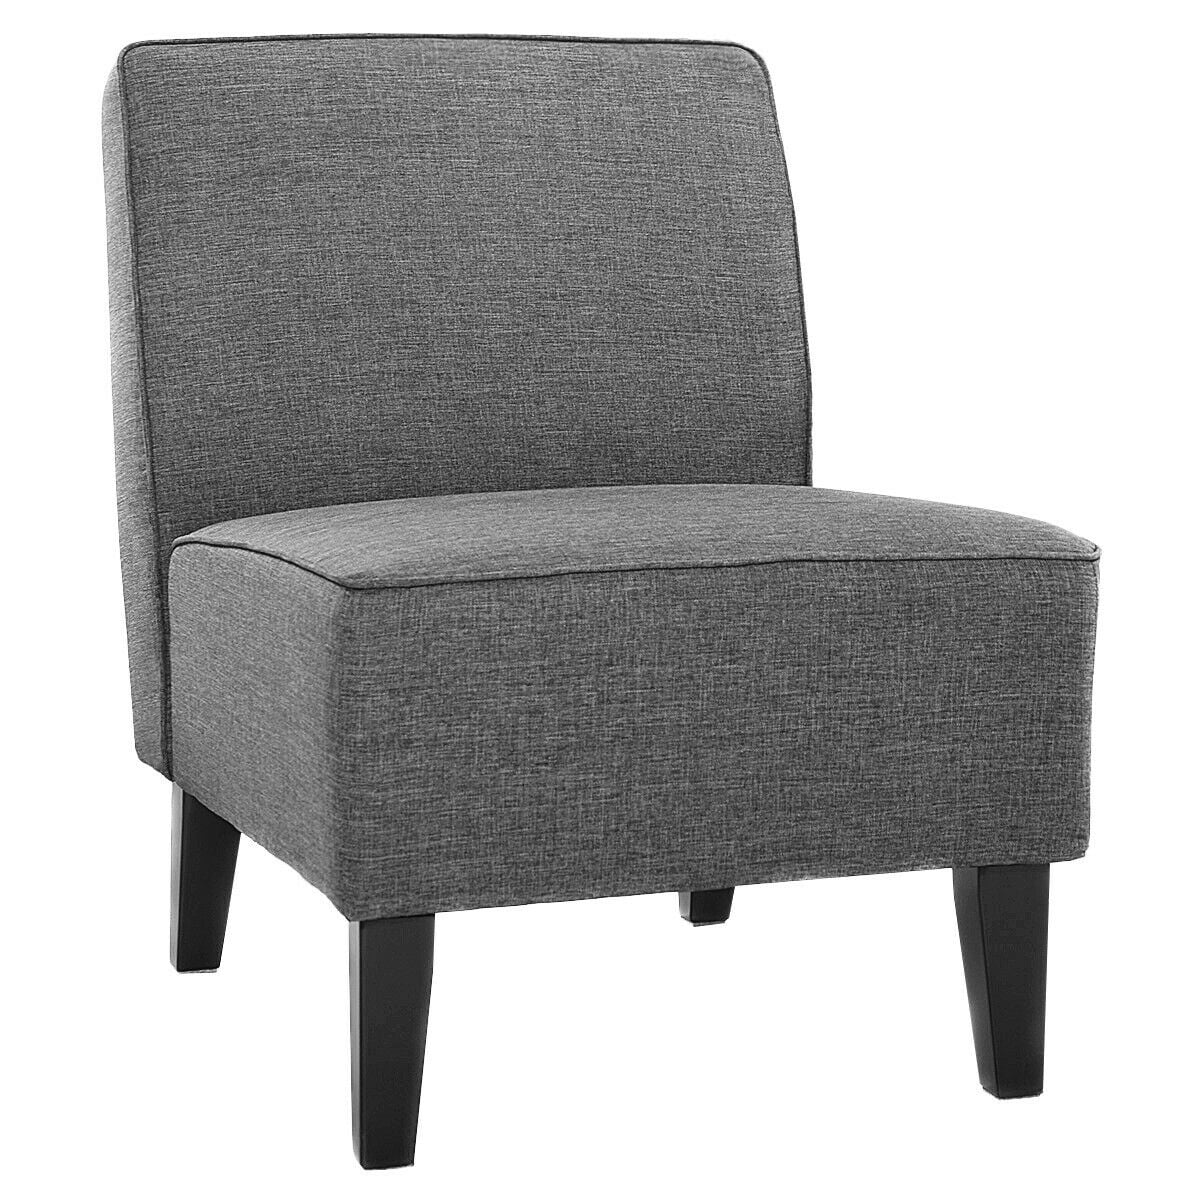 Contemporary Decor Solid Armless Accent Chair Gray On Sale Overstock 30745692